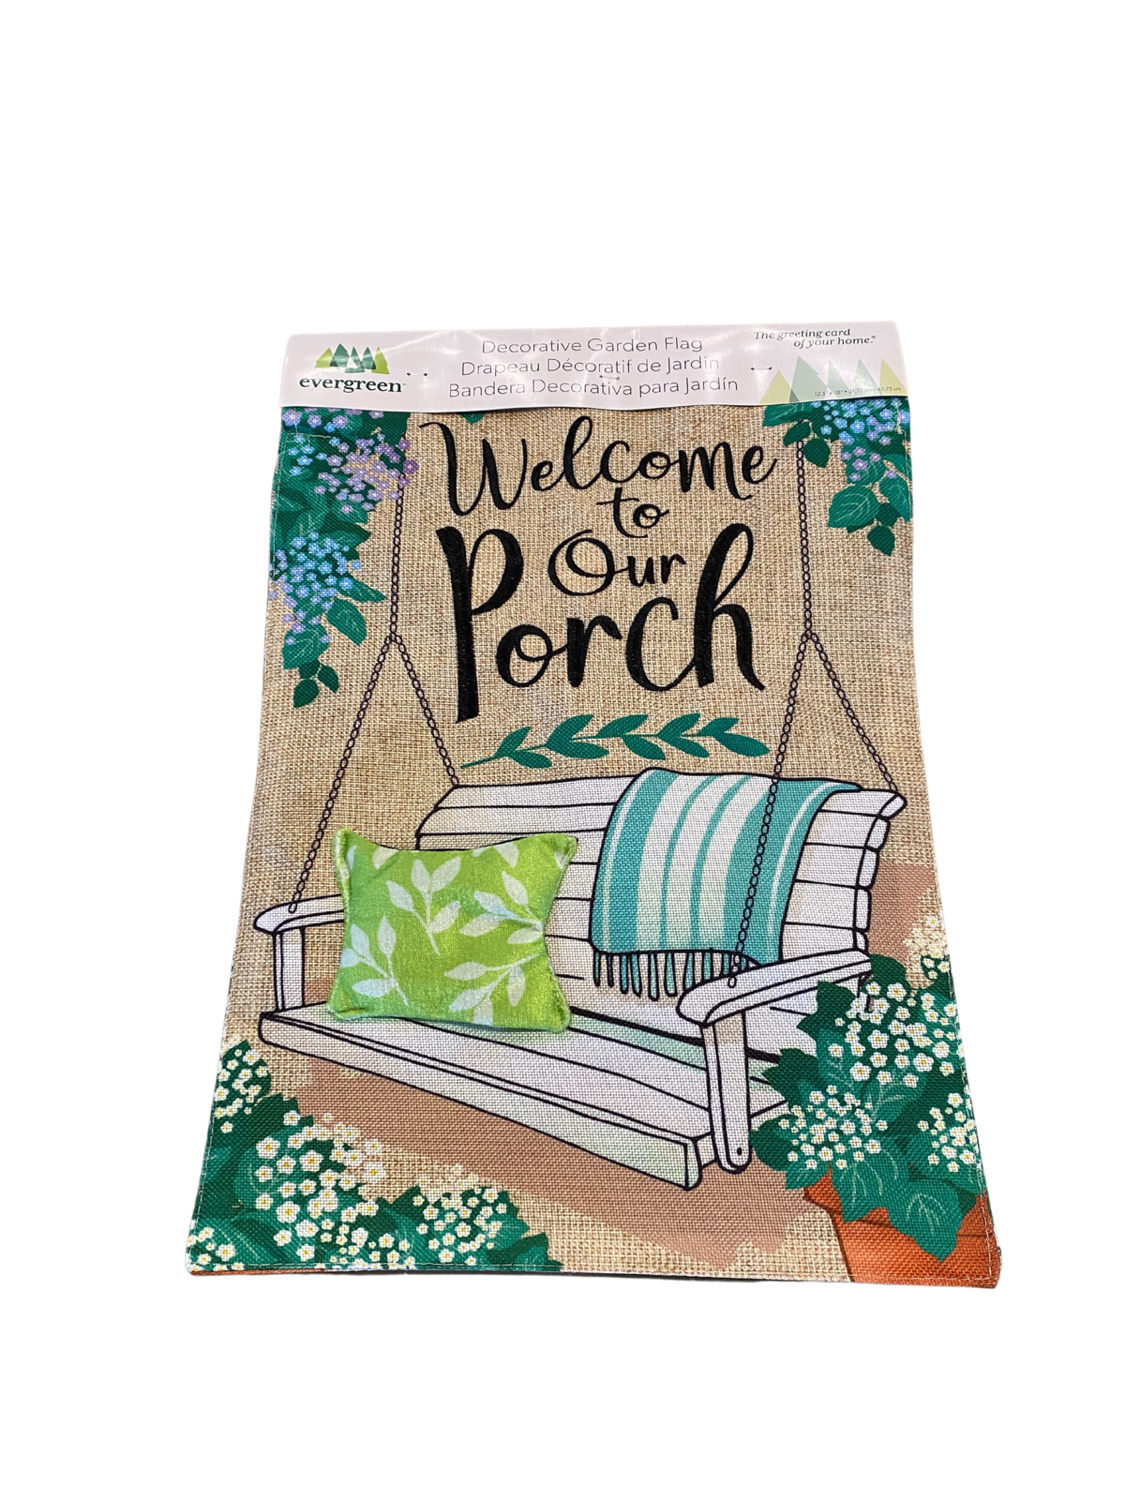 EE PORCH SWING WELCOME FLAG